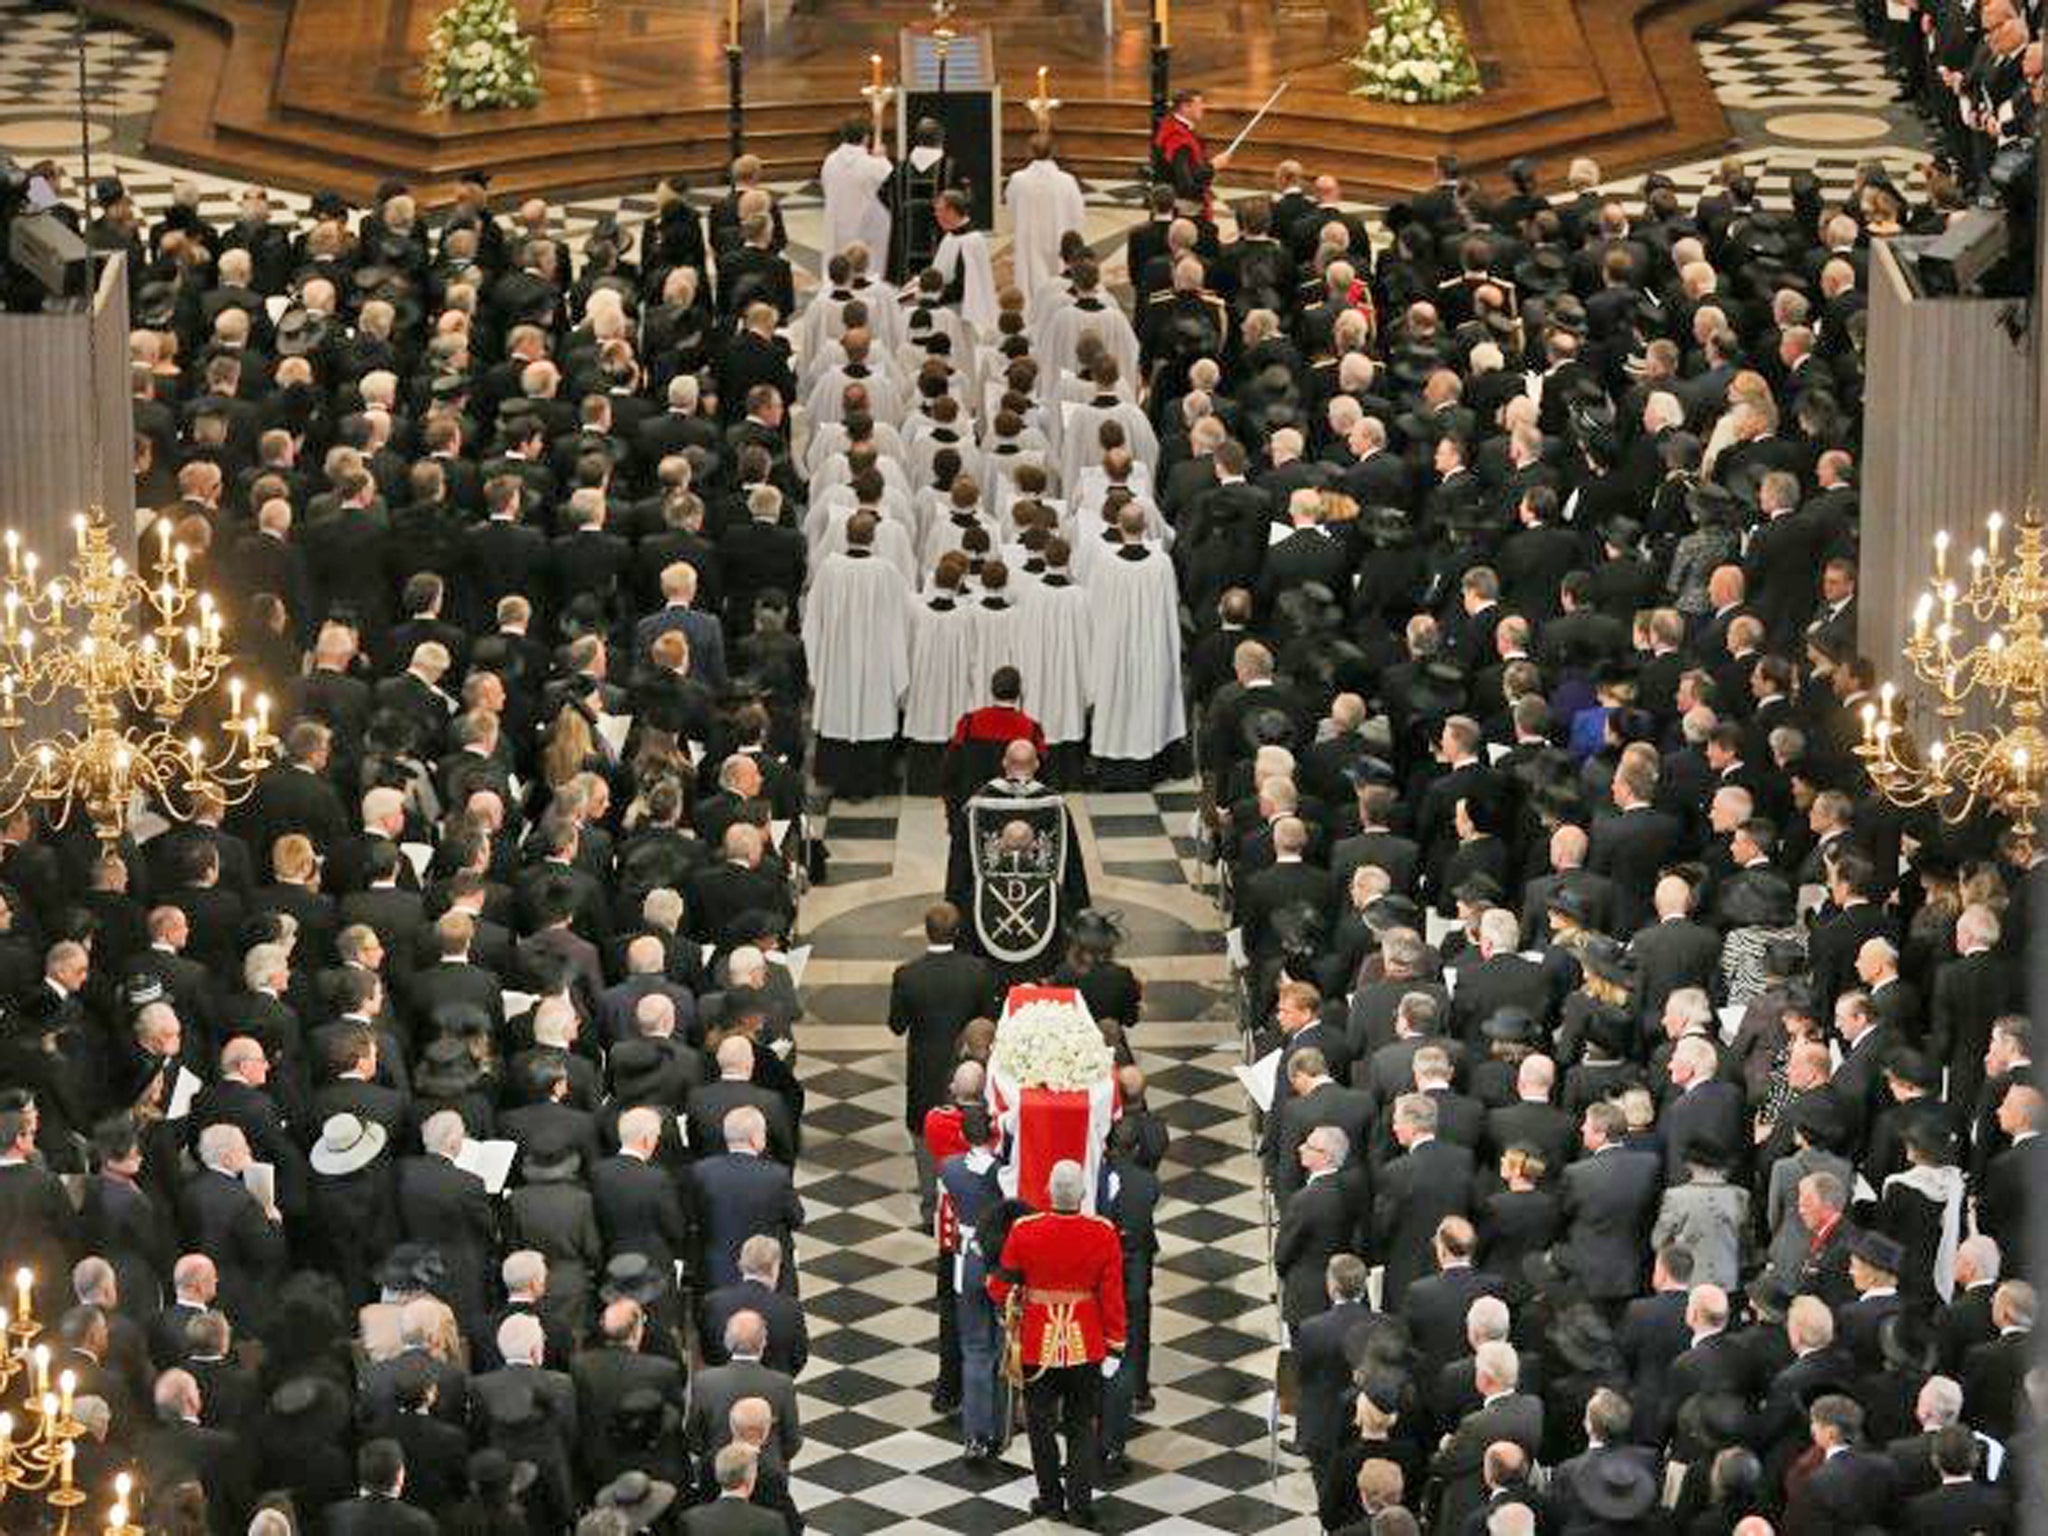 The coffin of former British prime minister Margaret Thatcher is carried by the Bearer Party as it arrives for her funeral service at St Paul's Cathedral